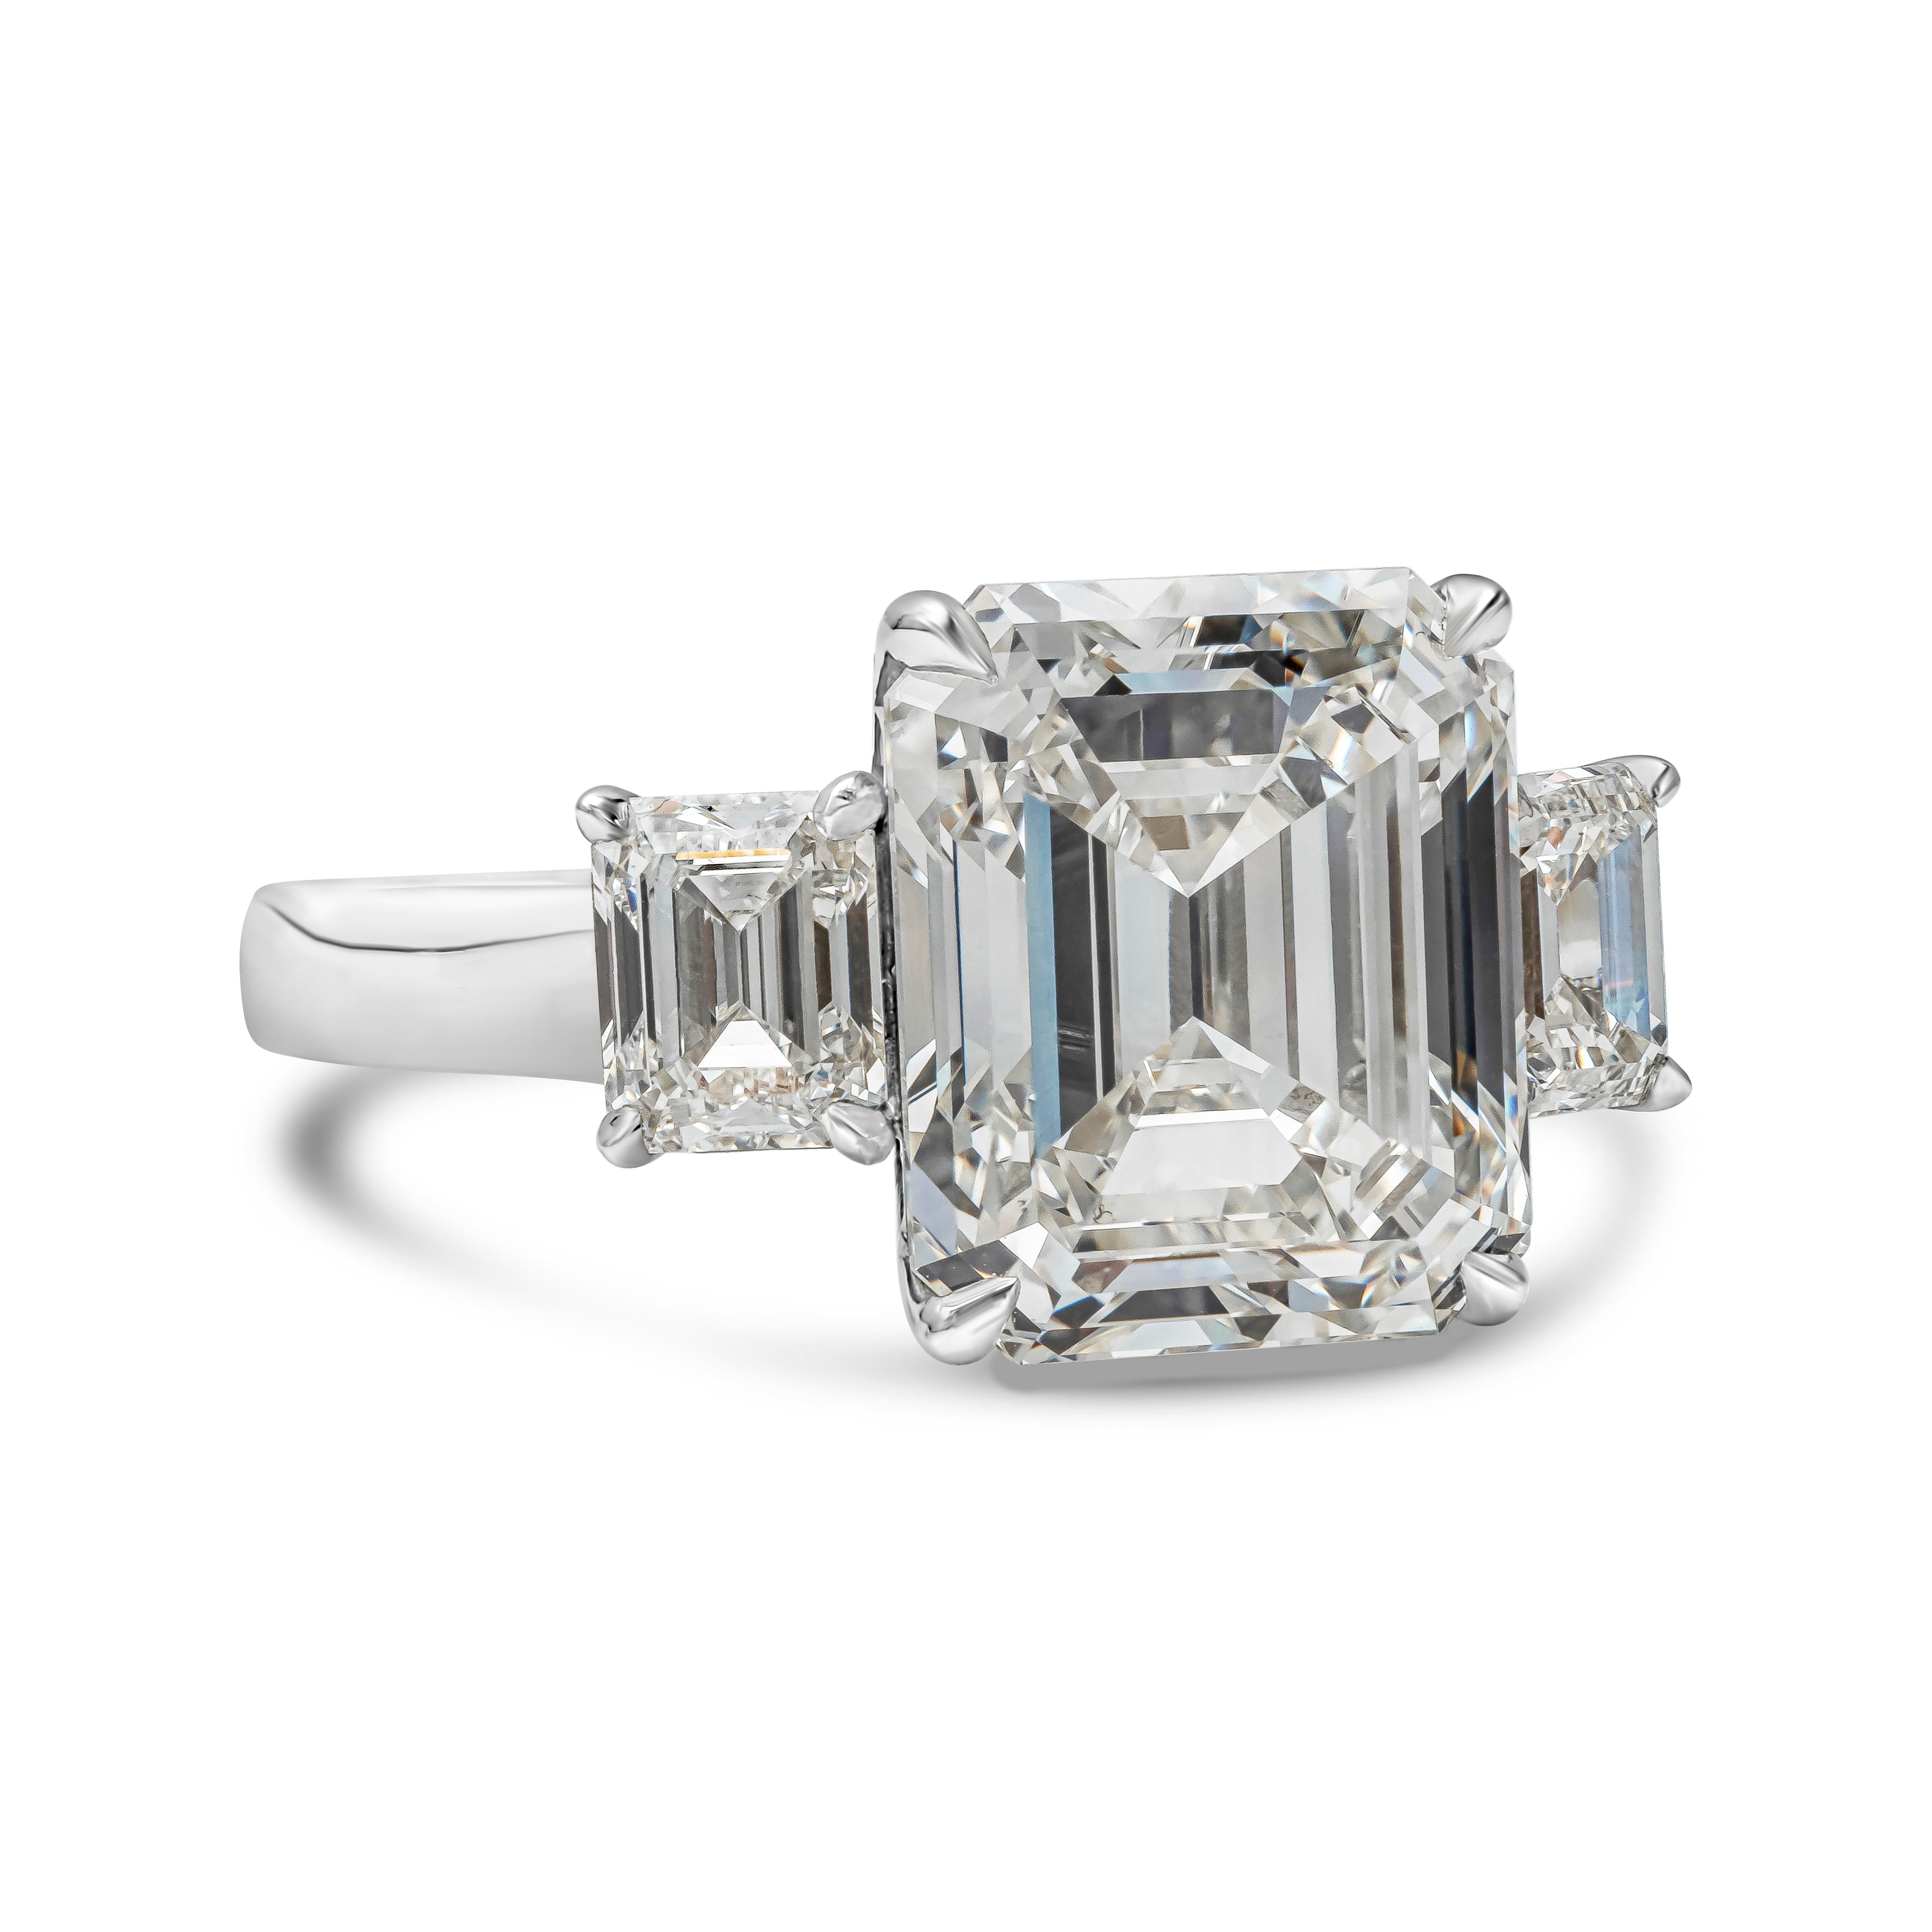 Brilliant and elegantly made three stone engagement ring showcasing a 6.73 carat emerald cut diamond certified by GIA as J color, VS2 in clarity. Flanked by smaller emerald cut diamonds on each sides weighing 1.22 carats total. Finely Made in